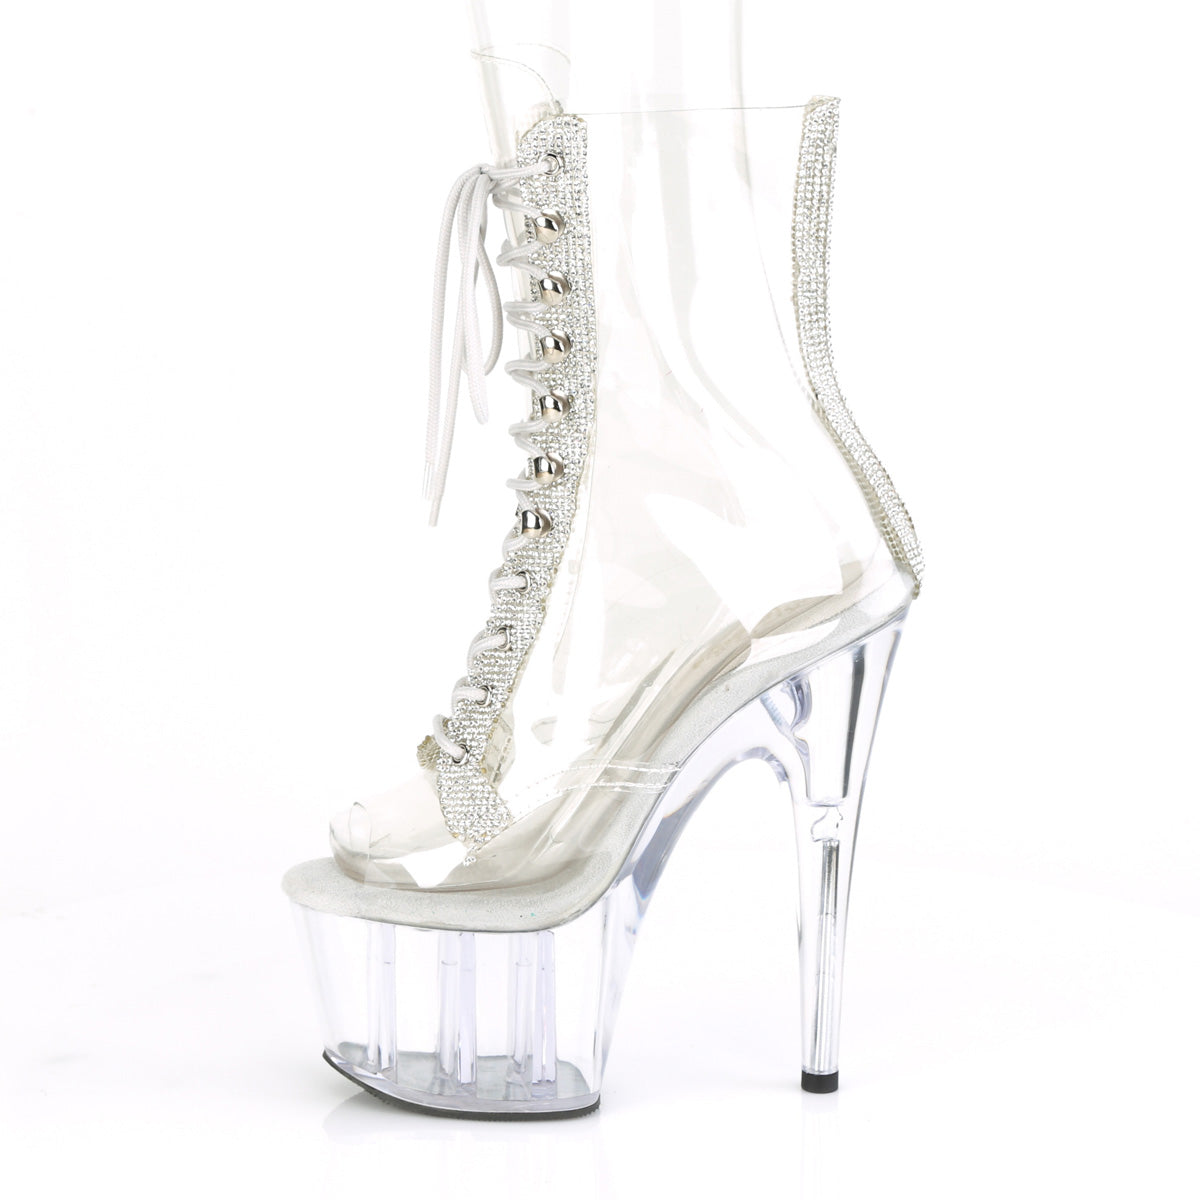 ADORE-1021C-2 Pleaser Pole Dancing Shoes 7 Inch Heel Pleasers - Sexy Shoes Pole Dance Heels